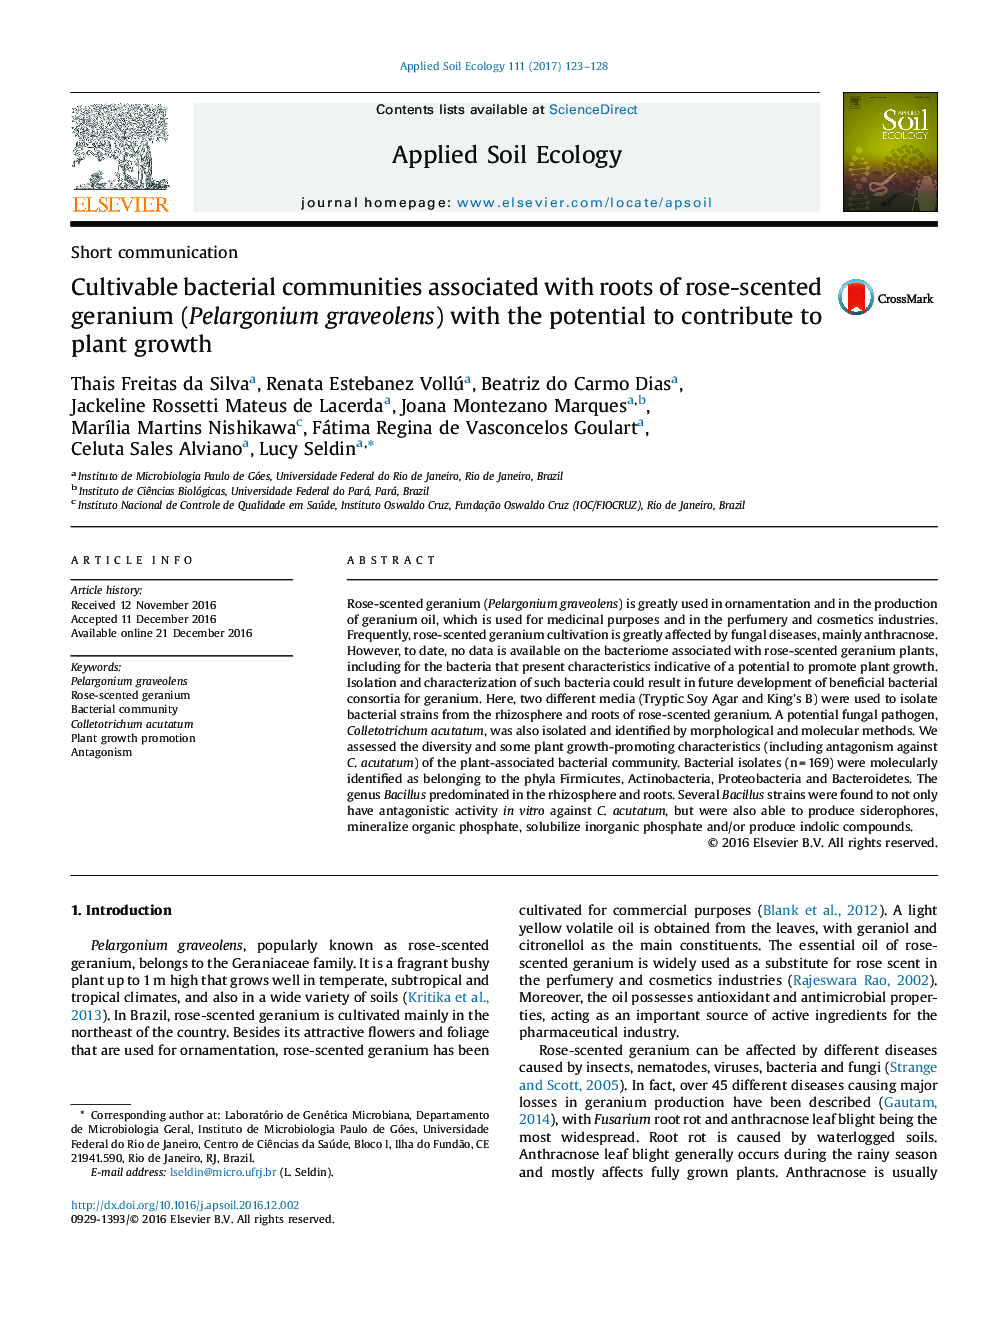 Short communicationCultivable bacterial communities associated with roots of rose-scented geranium (Pelargonium graveolens) with the potential to contribute to plant growth